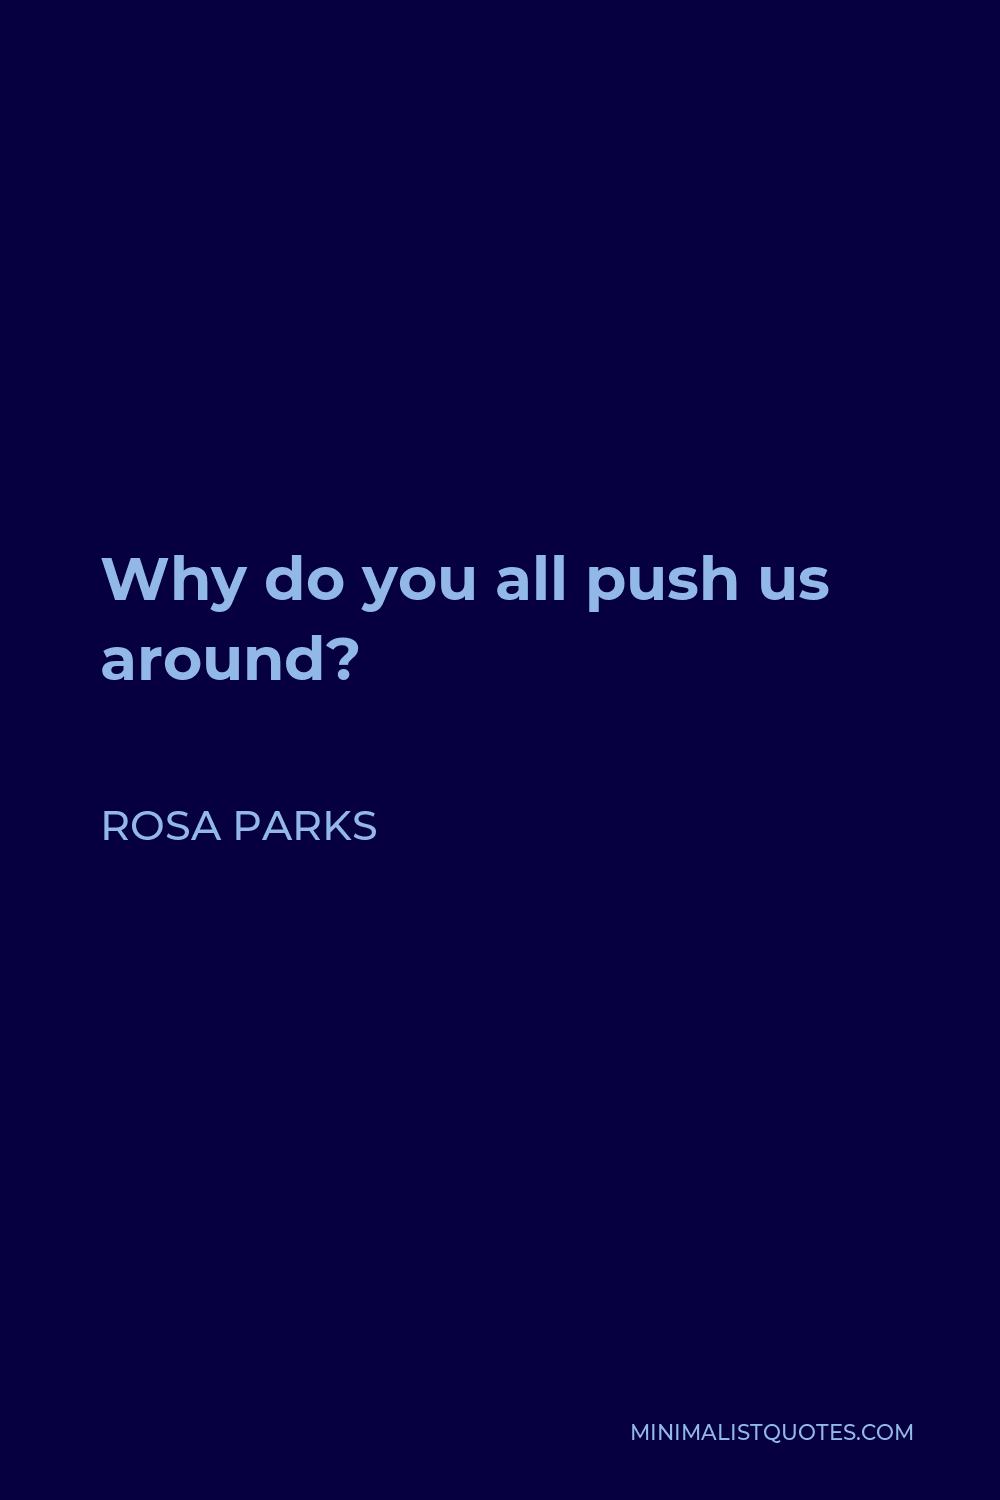 Rosa Parks Quote - Why do you all push us around?